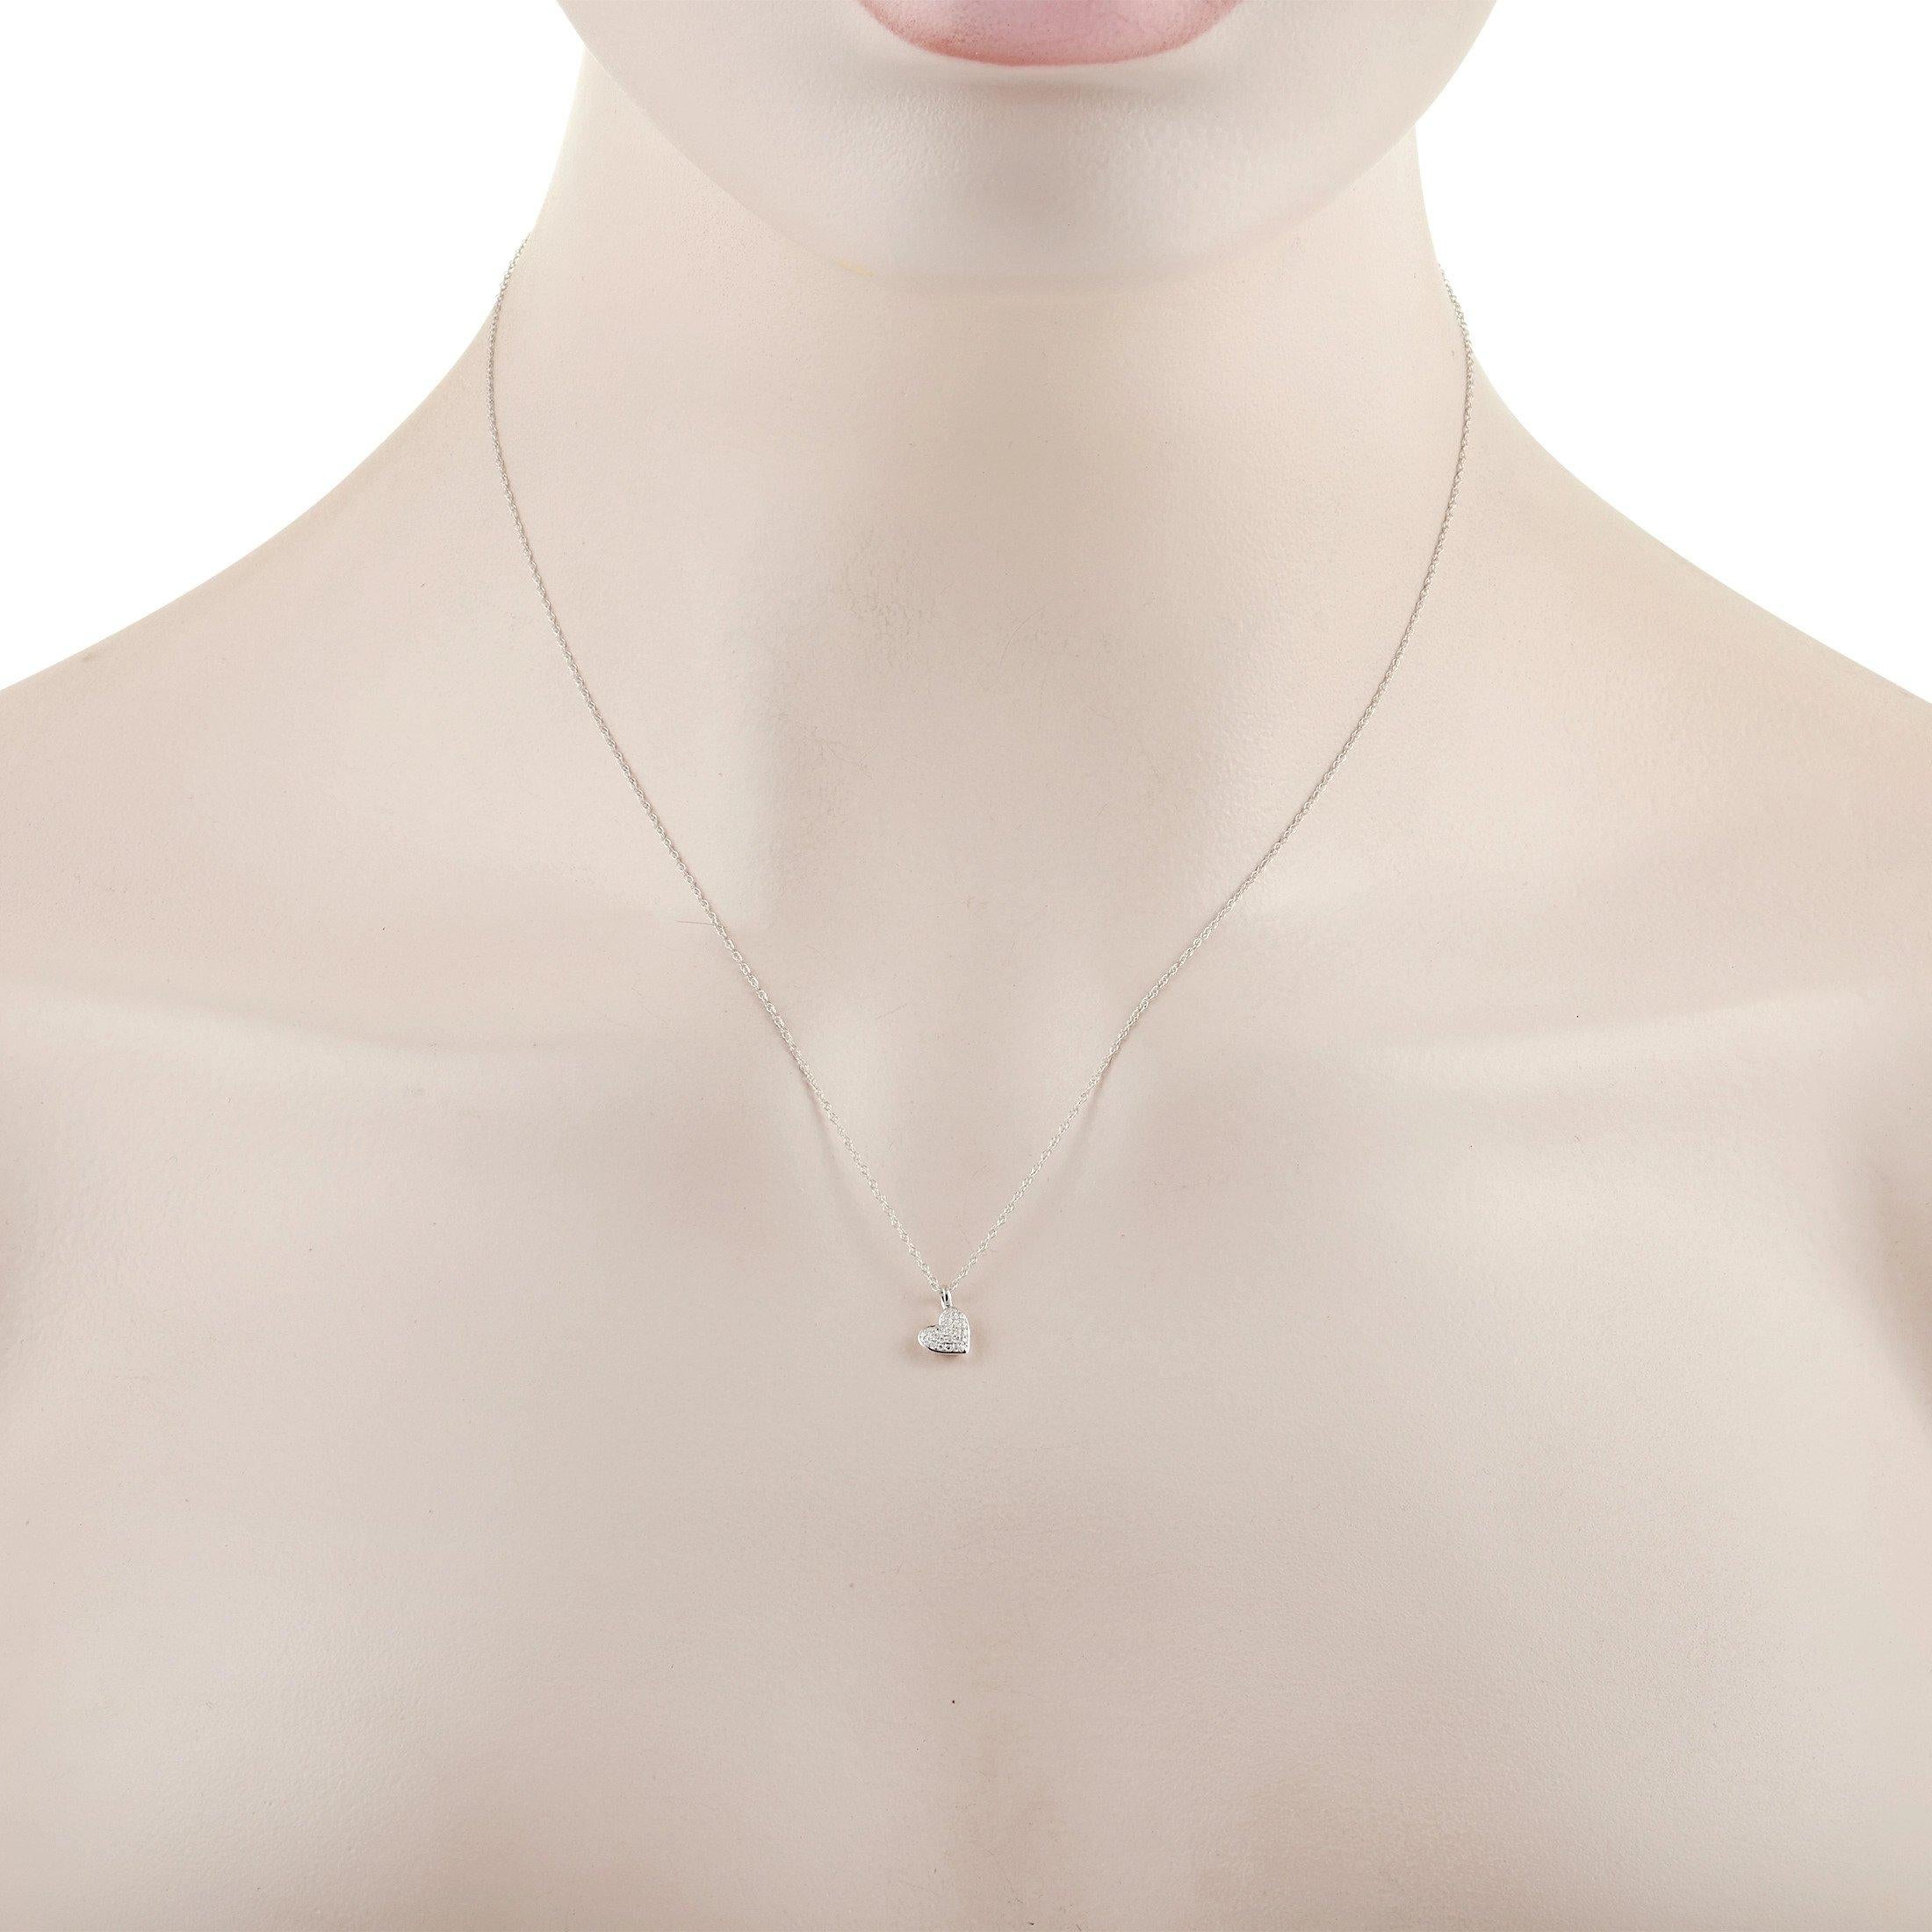 This elegant LB Exclusive 14K White Gold 0.06 ct Diamond Heart Necklace is made with a delicate 14K white gold chain, highlighting a small 14k white gold heart pendant. The heart is set with a cluster of round-cut diamonds totalling 0.06 carats over